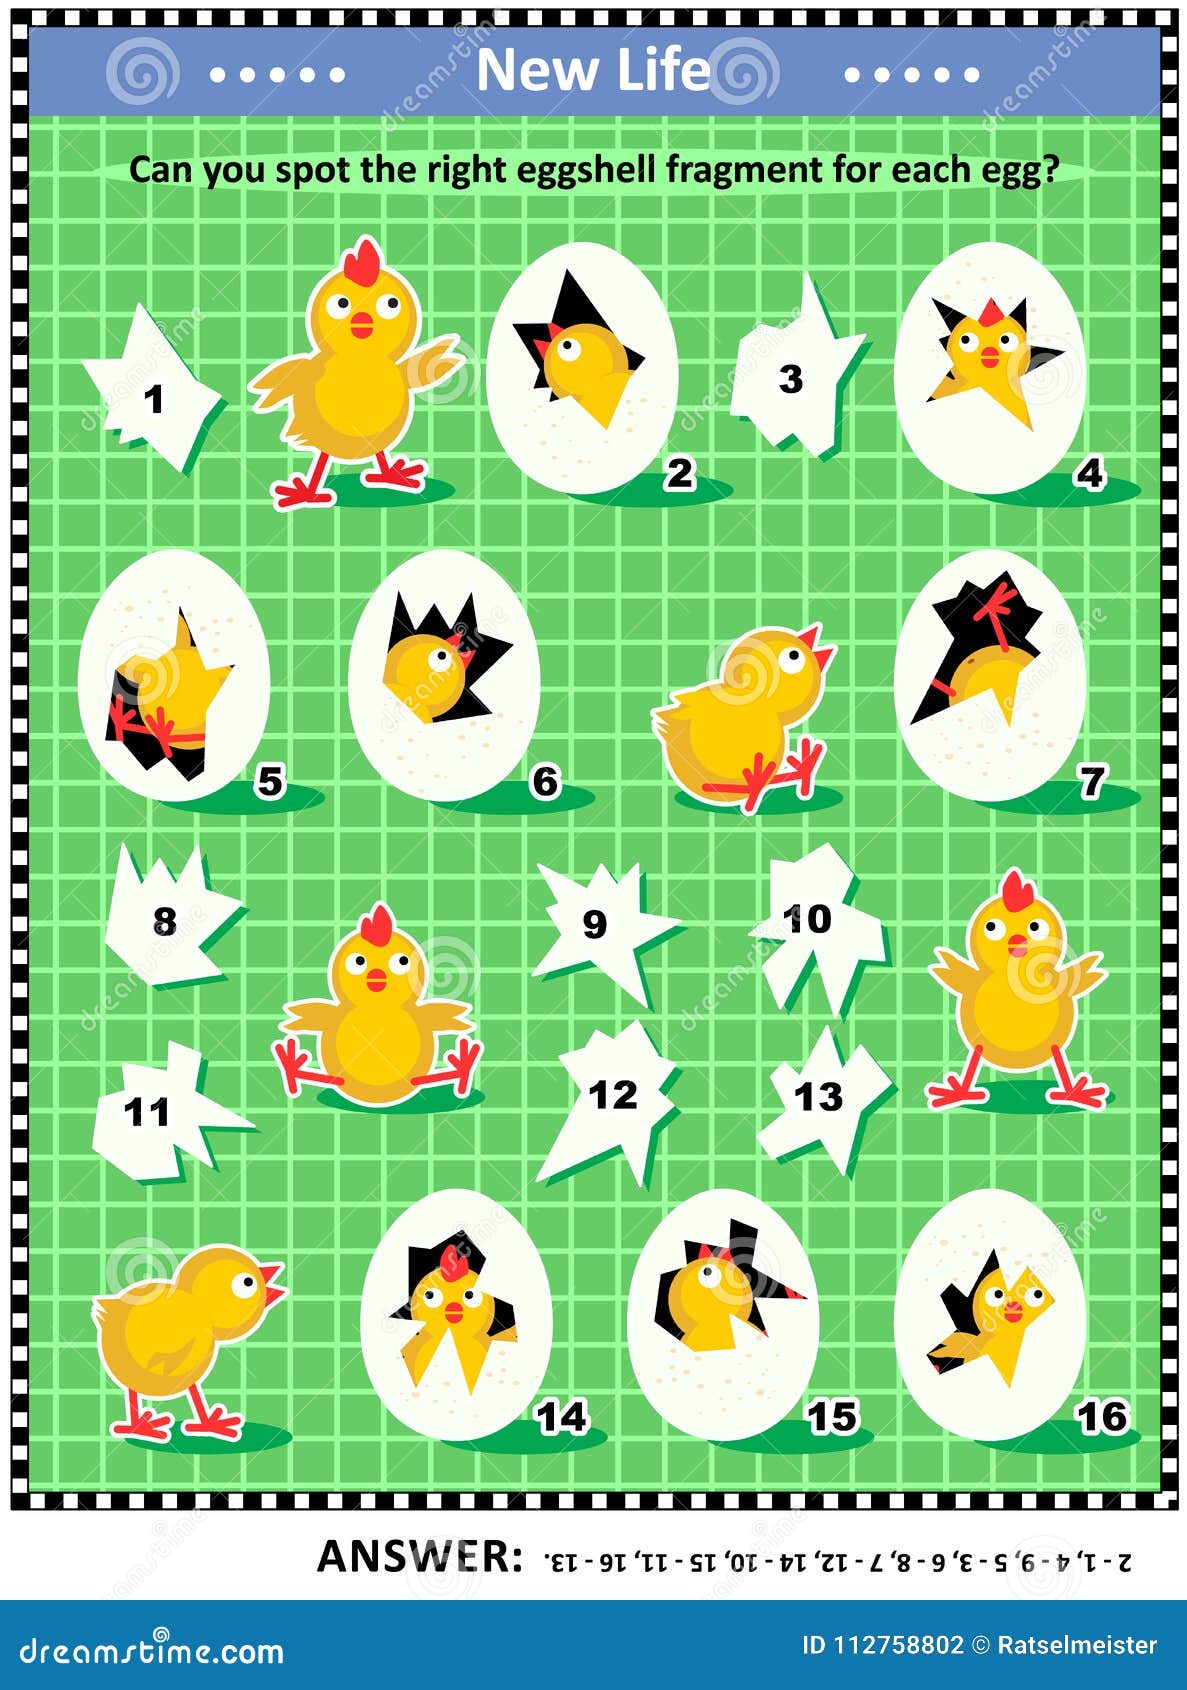 spring or easter visual logic puzzle with newborn chicks, eggs and eggshell fragments